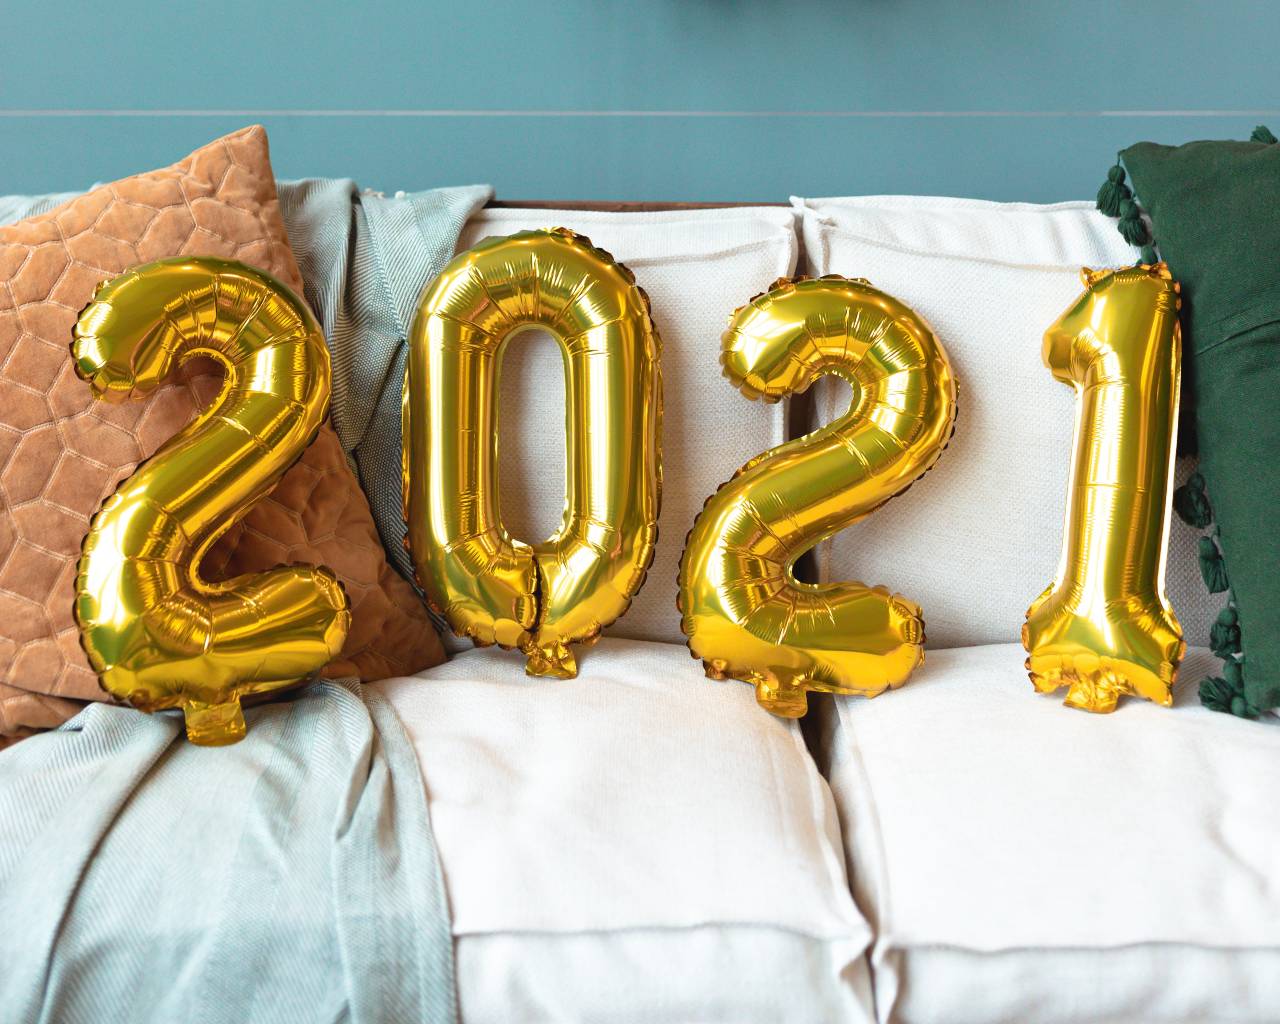 Four gold inflatable balloons resting on a couch spell out "2021"